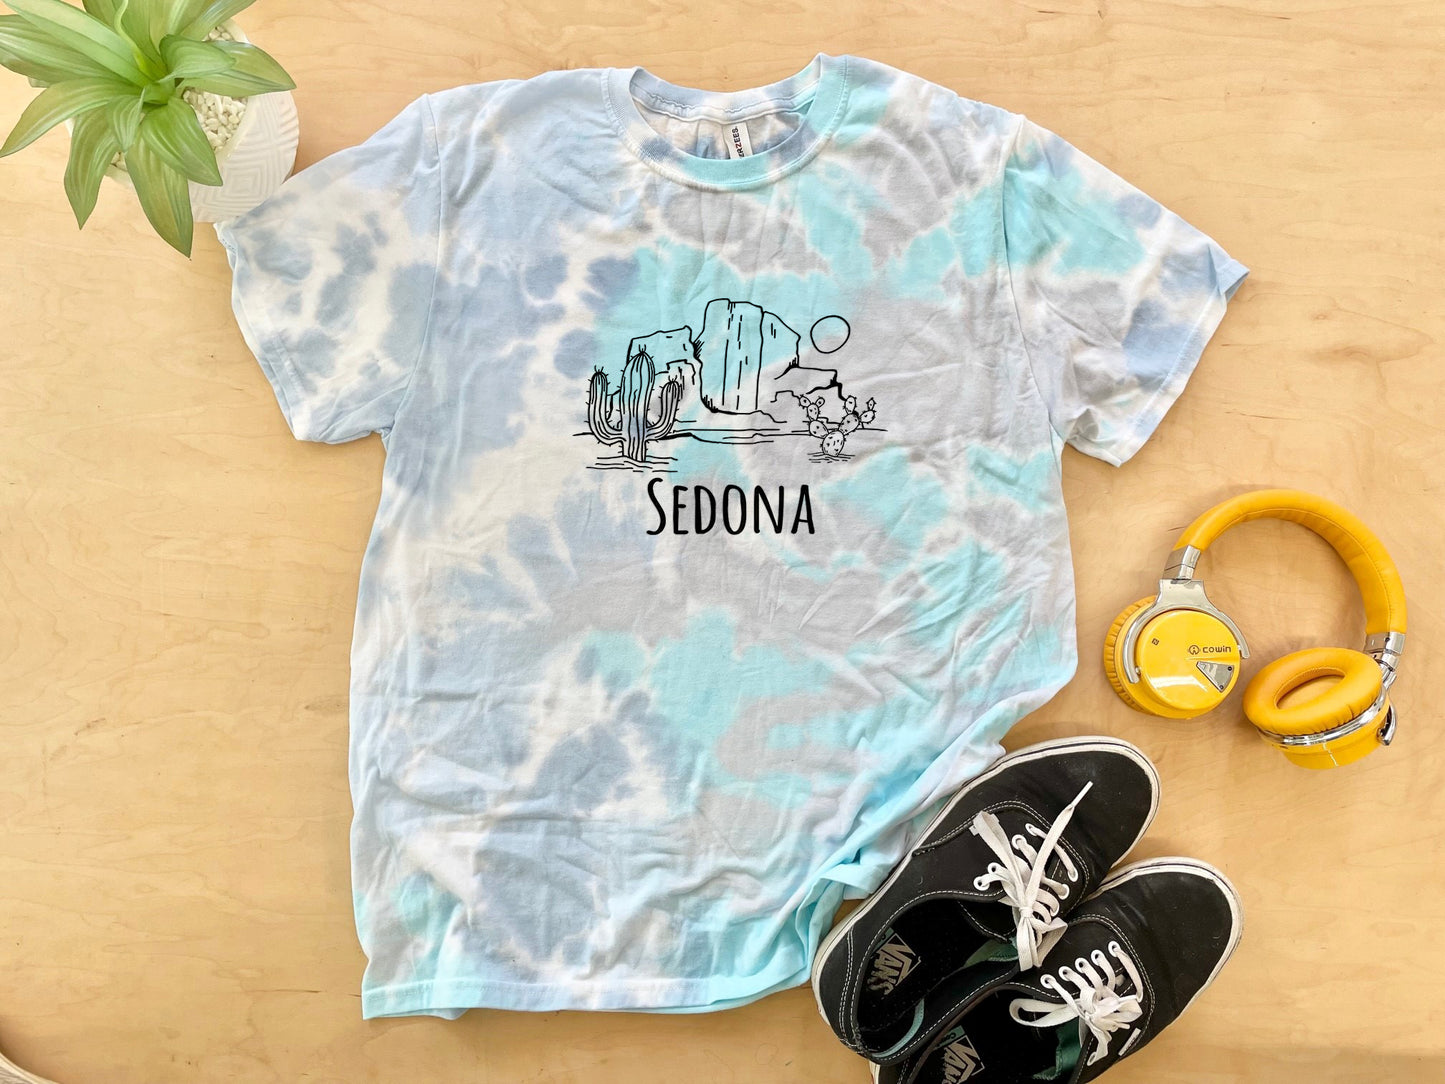 a tie dye shirt with the word sedona on it next to headphones